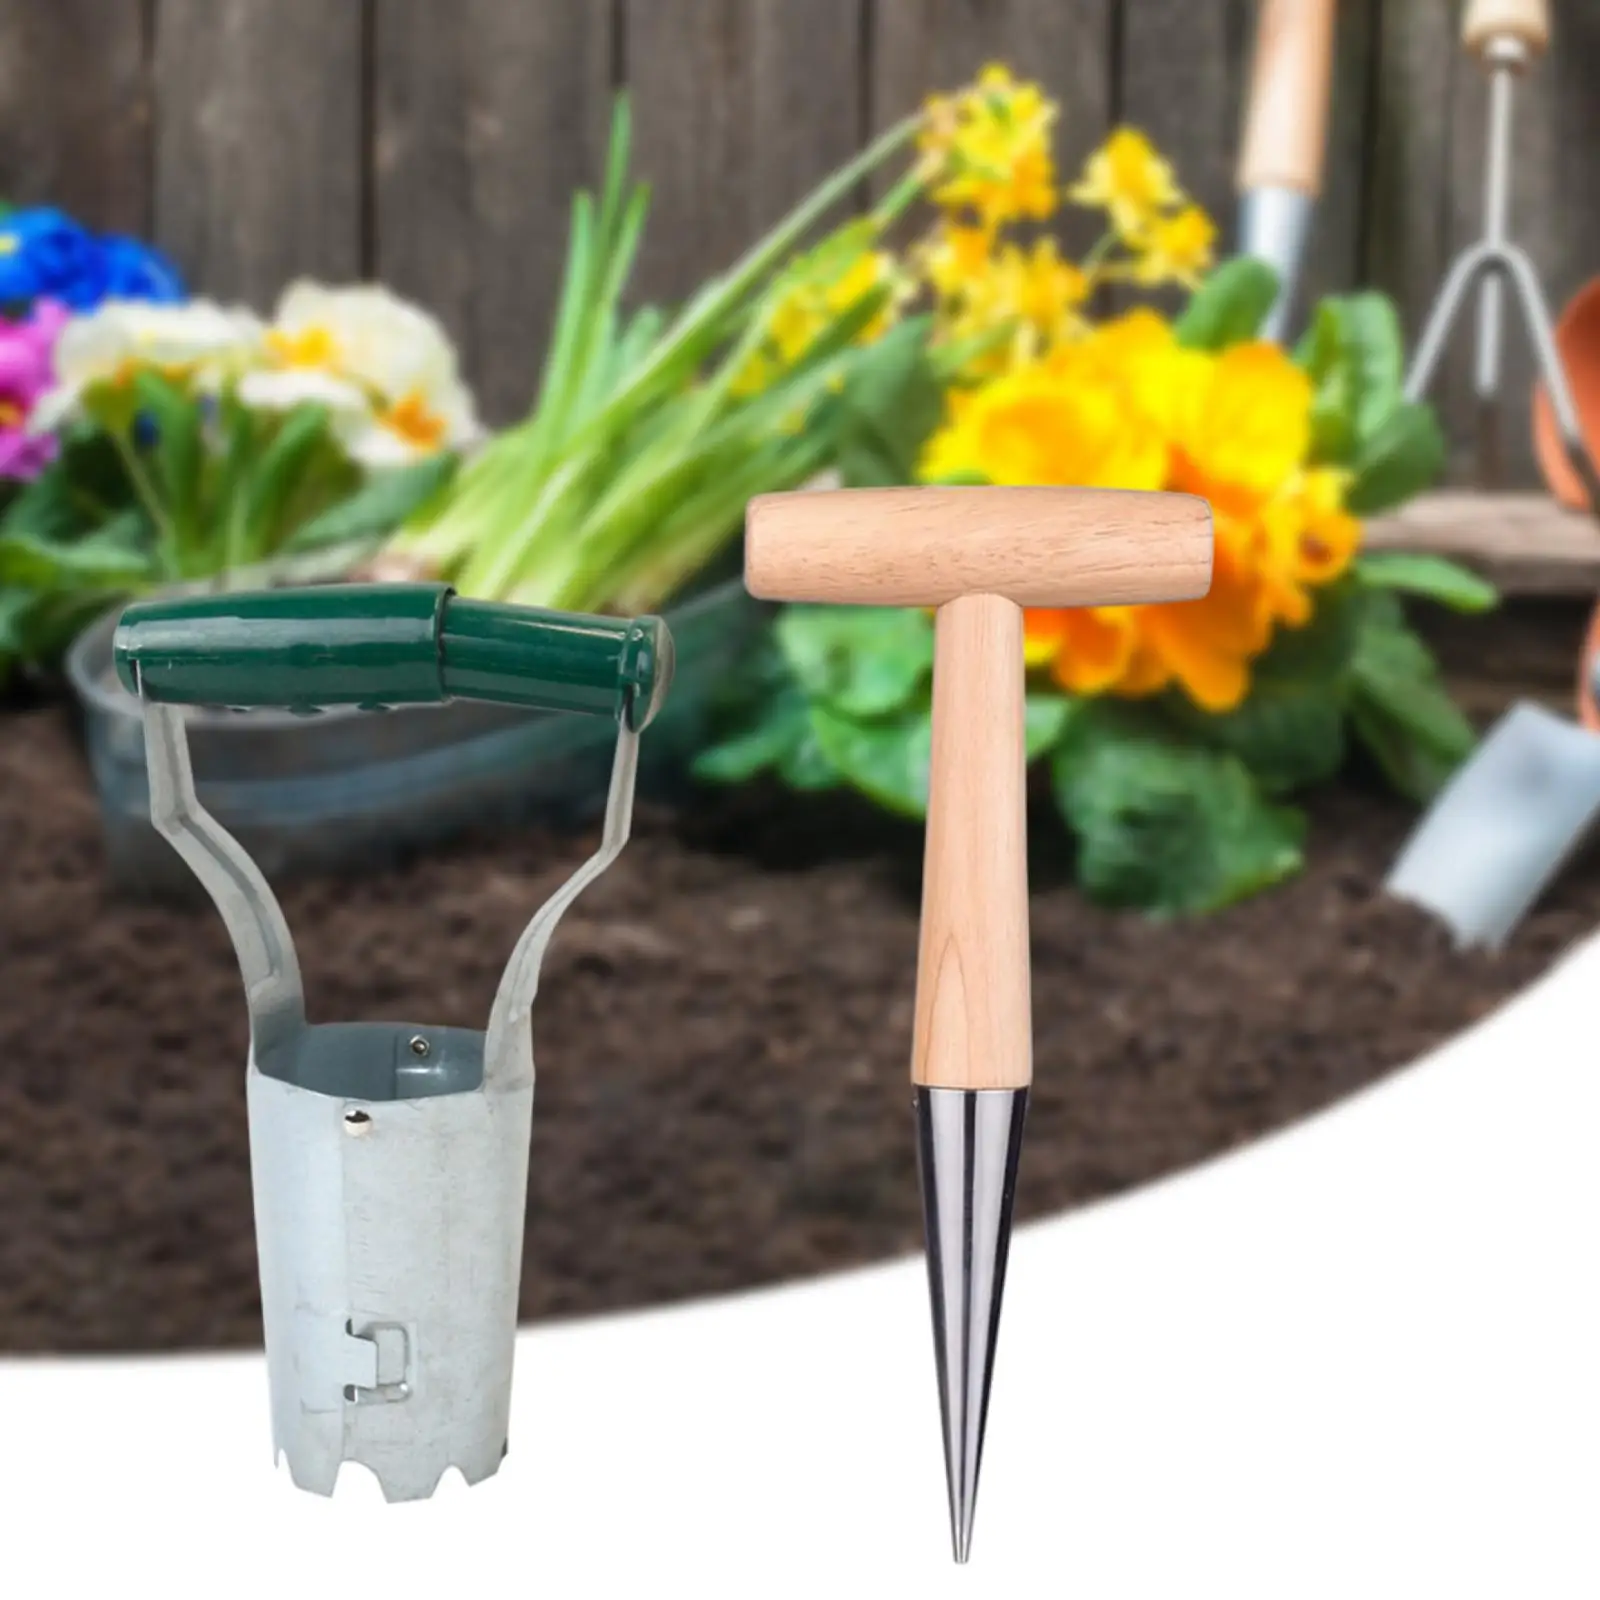 2x Planting Seeds and Bulb Tools Soil Insertion Flower Bulb Planting Sowing